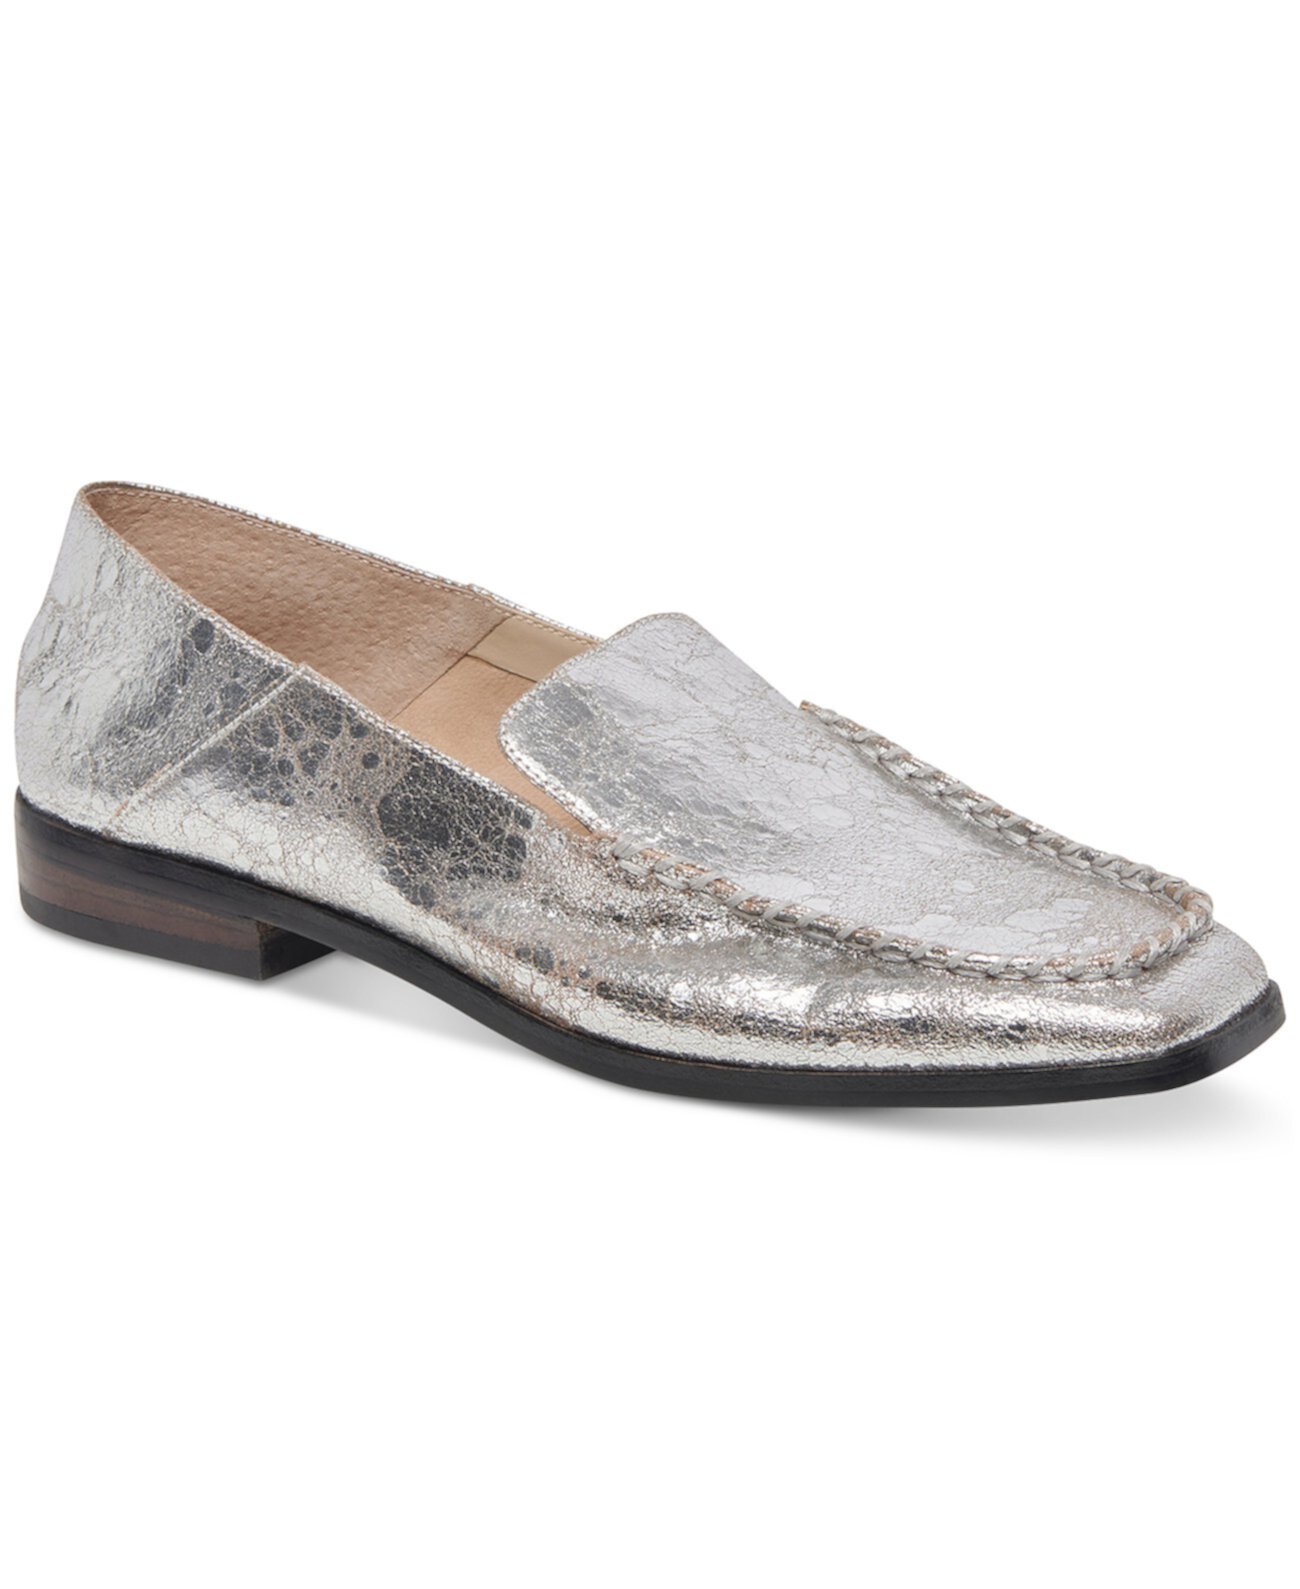 Women's Beny Tailored Loafer Flats Dolce Vita